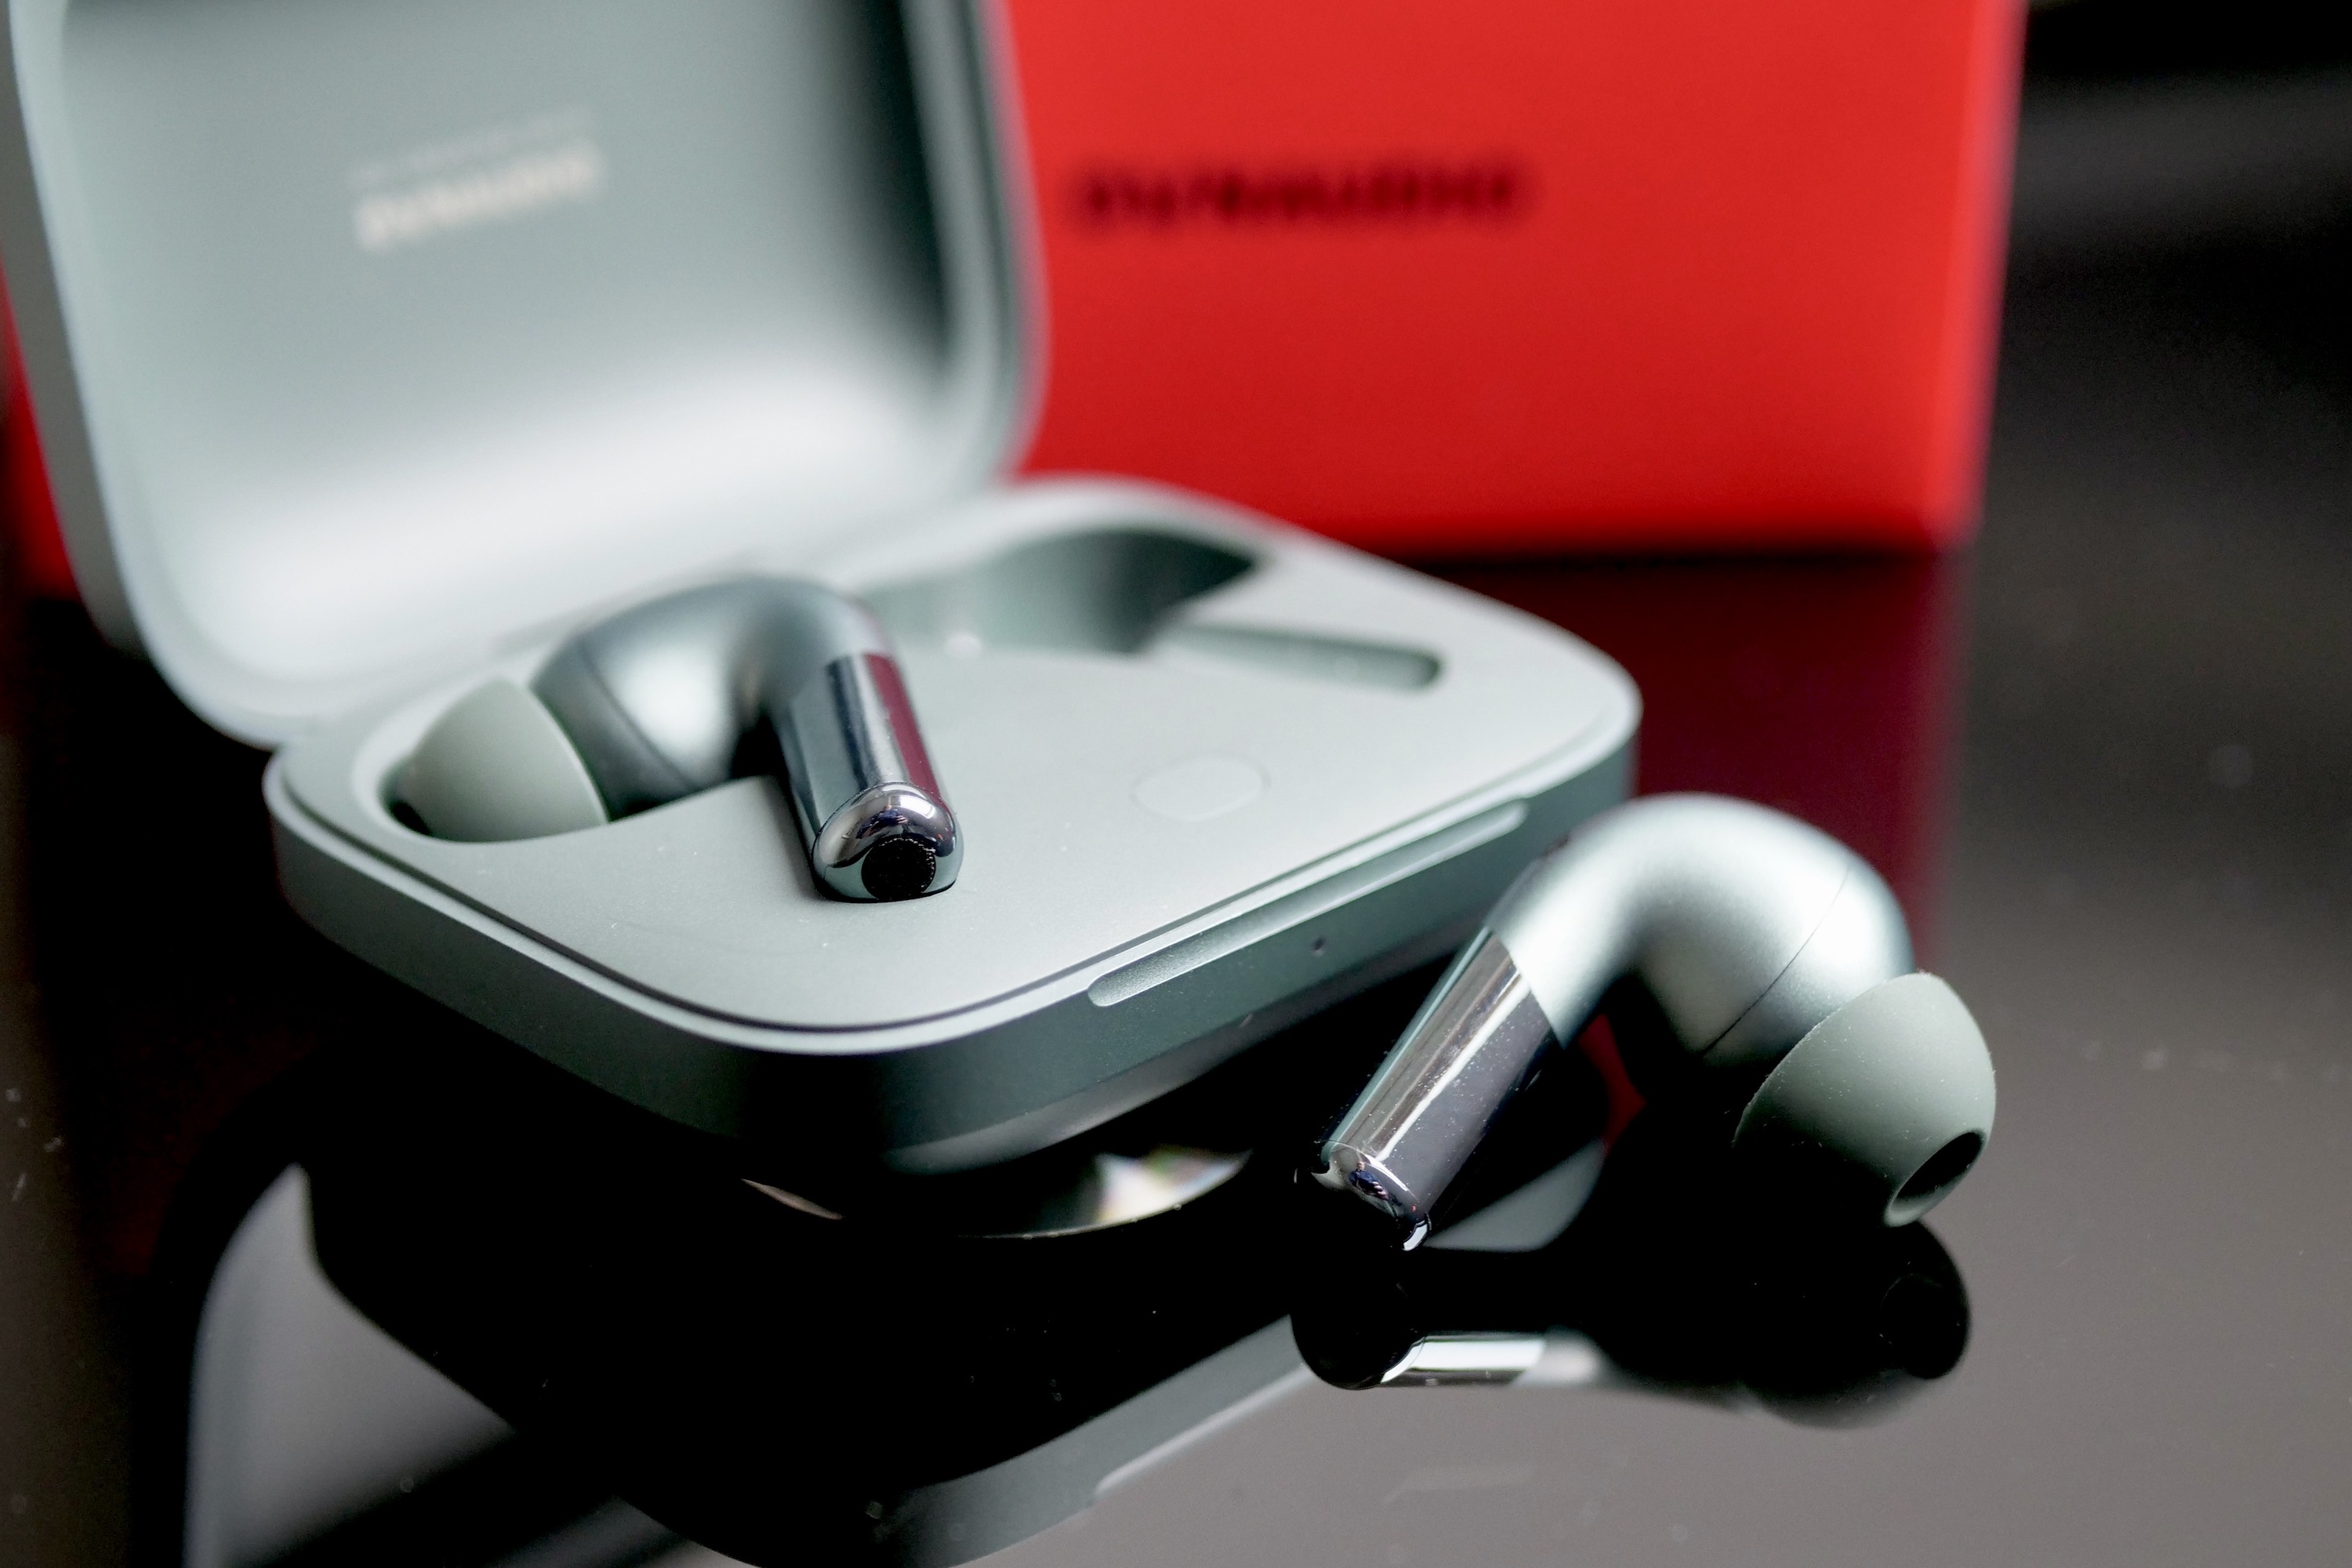 The OnePlus Buds Pro 2 earbuds sit next to the open box.